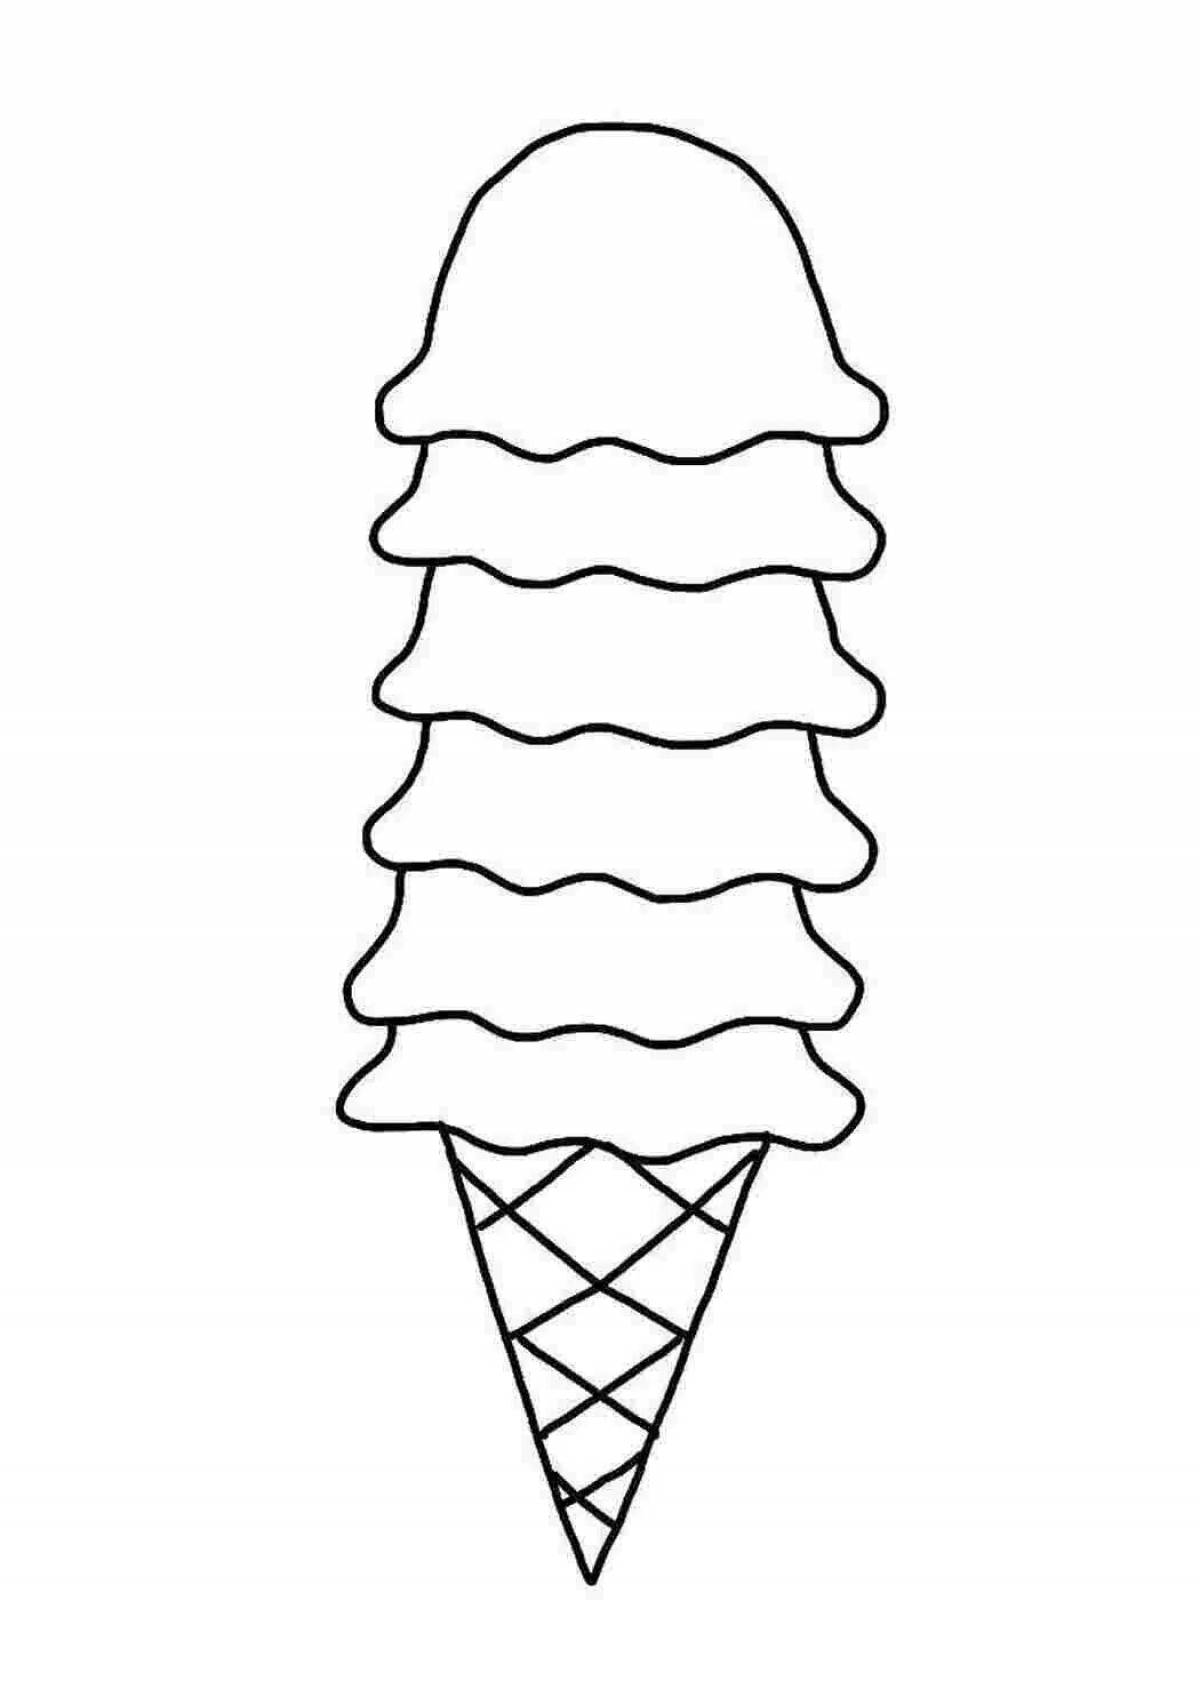 Glowing ice cream coloring page for kids